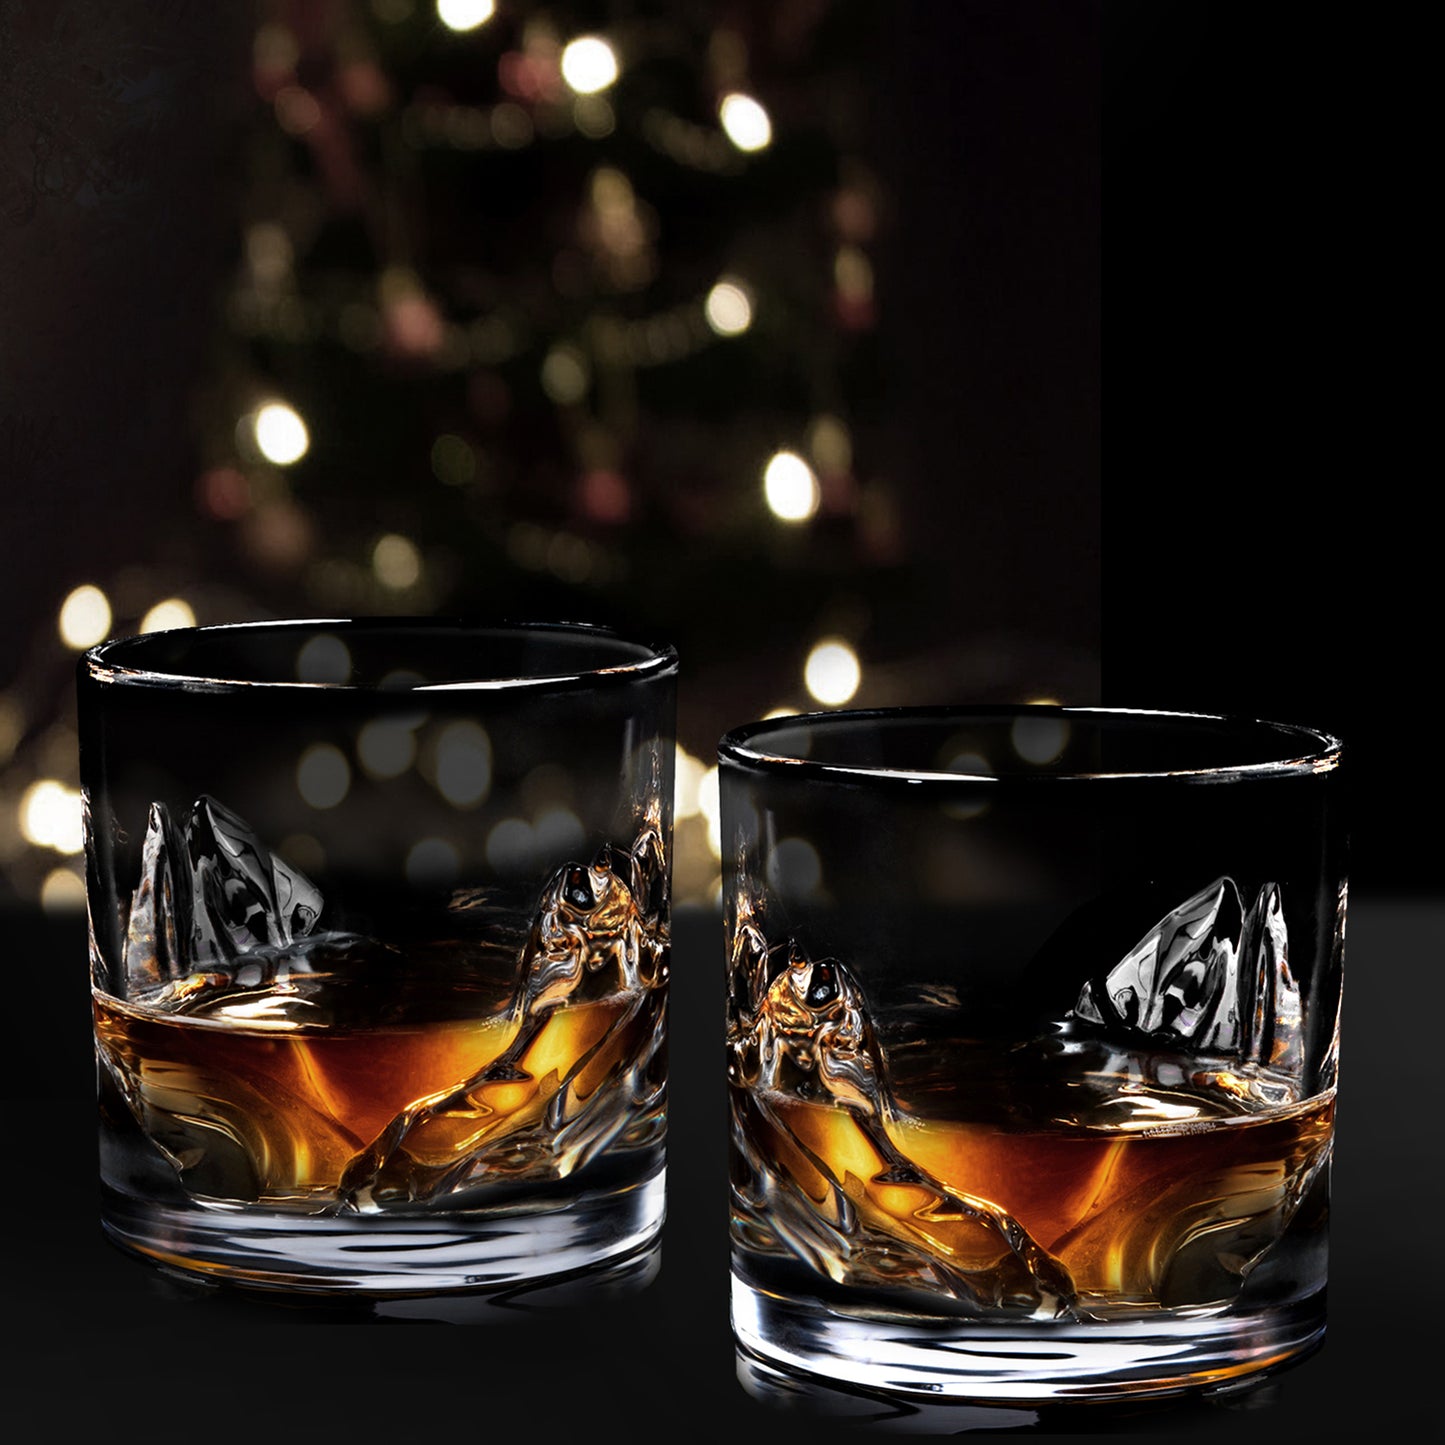 Liiton Grand Canyon 300 mL (10oz.) Whiskey Glasses, Pack of 4